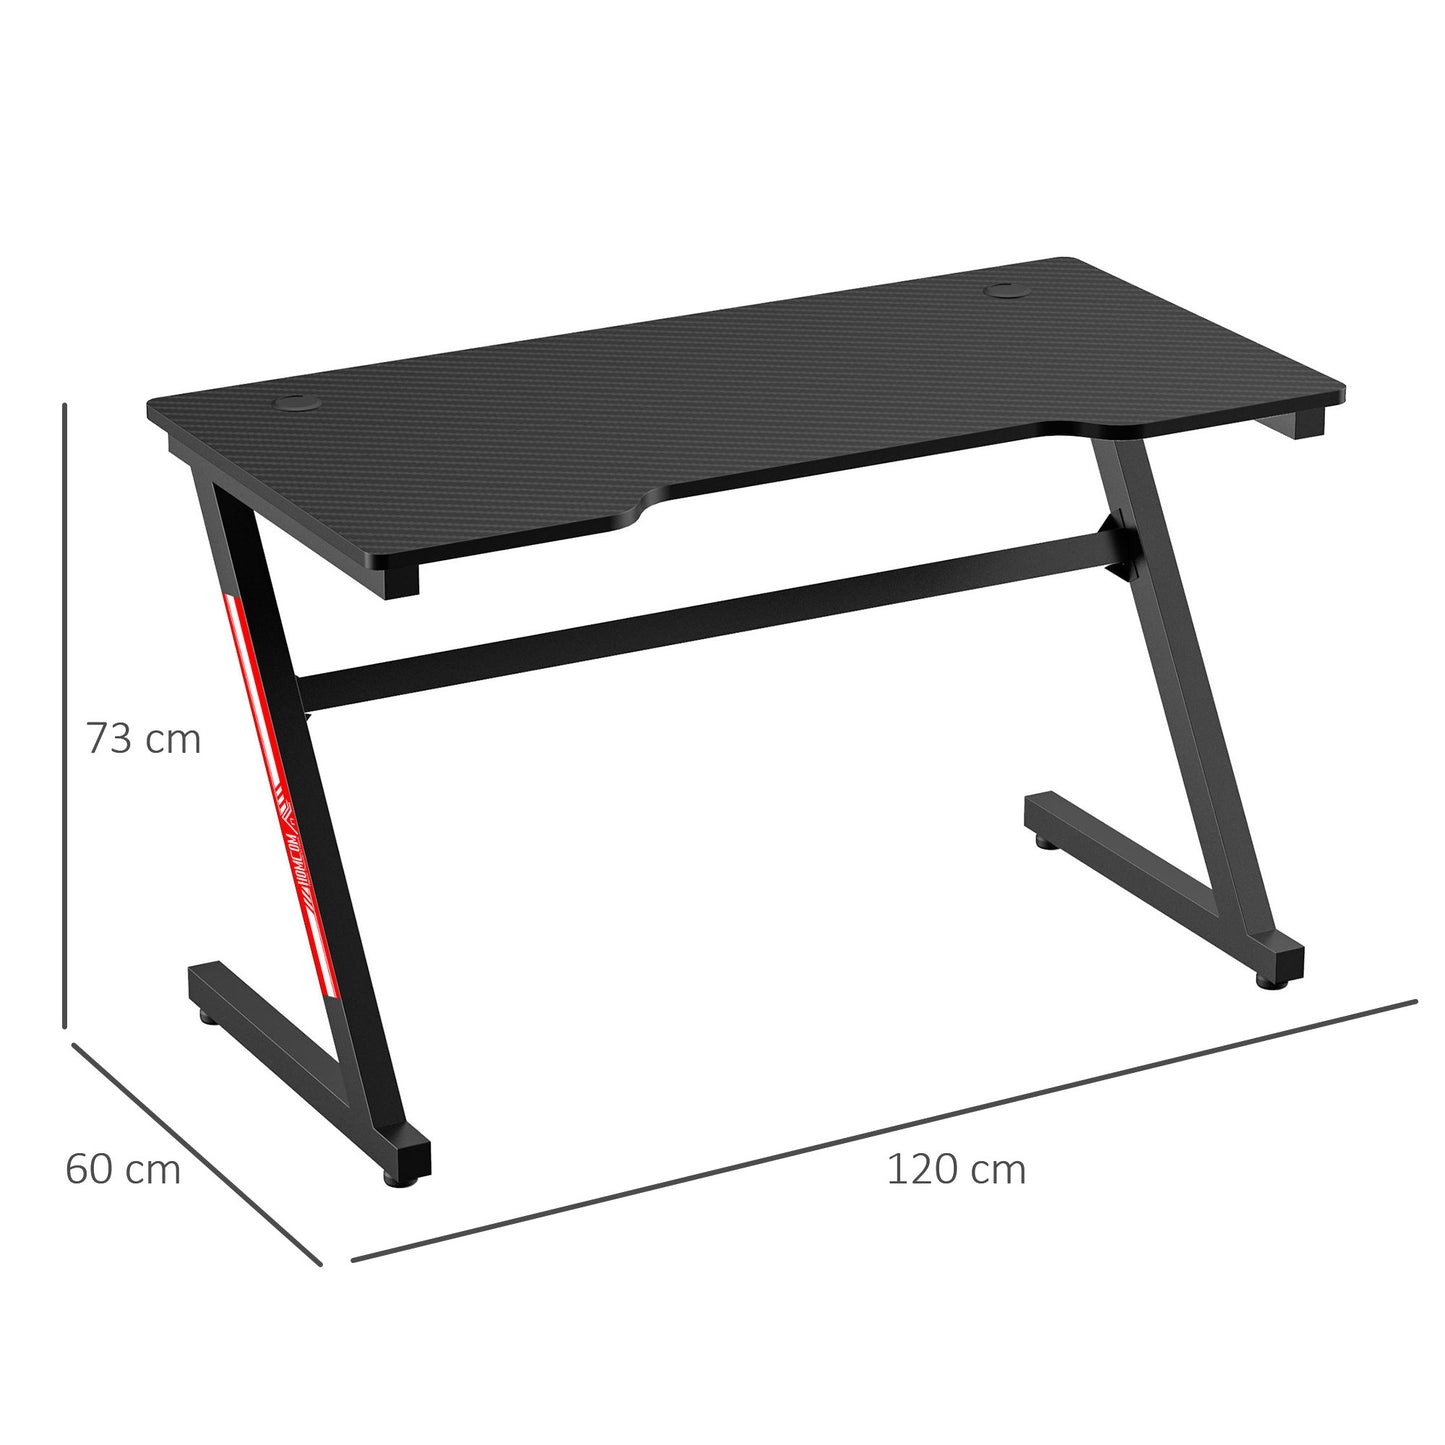 HOMCOM 1.2m Z-Shaped Racing Style Gaming Desk w/ Cable Managenent Home Office Black